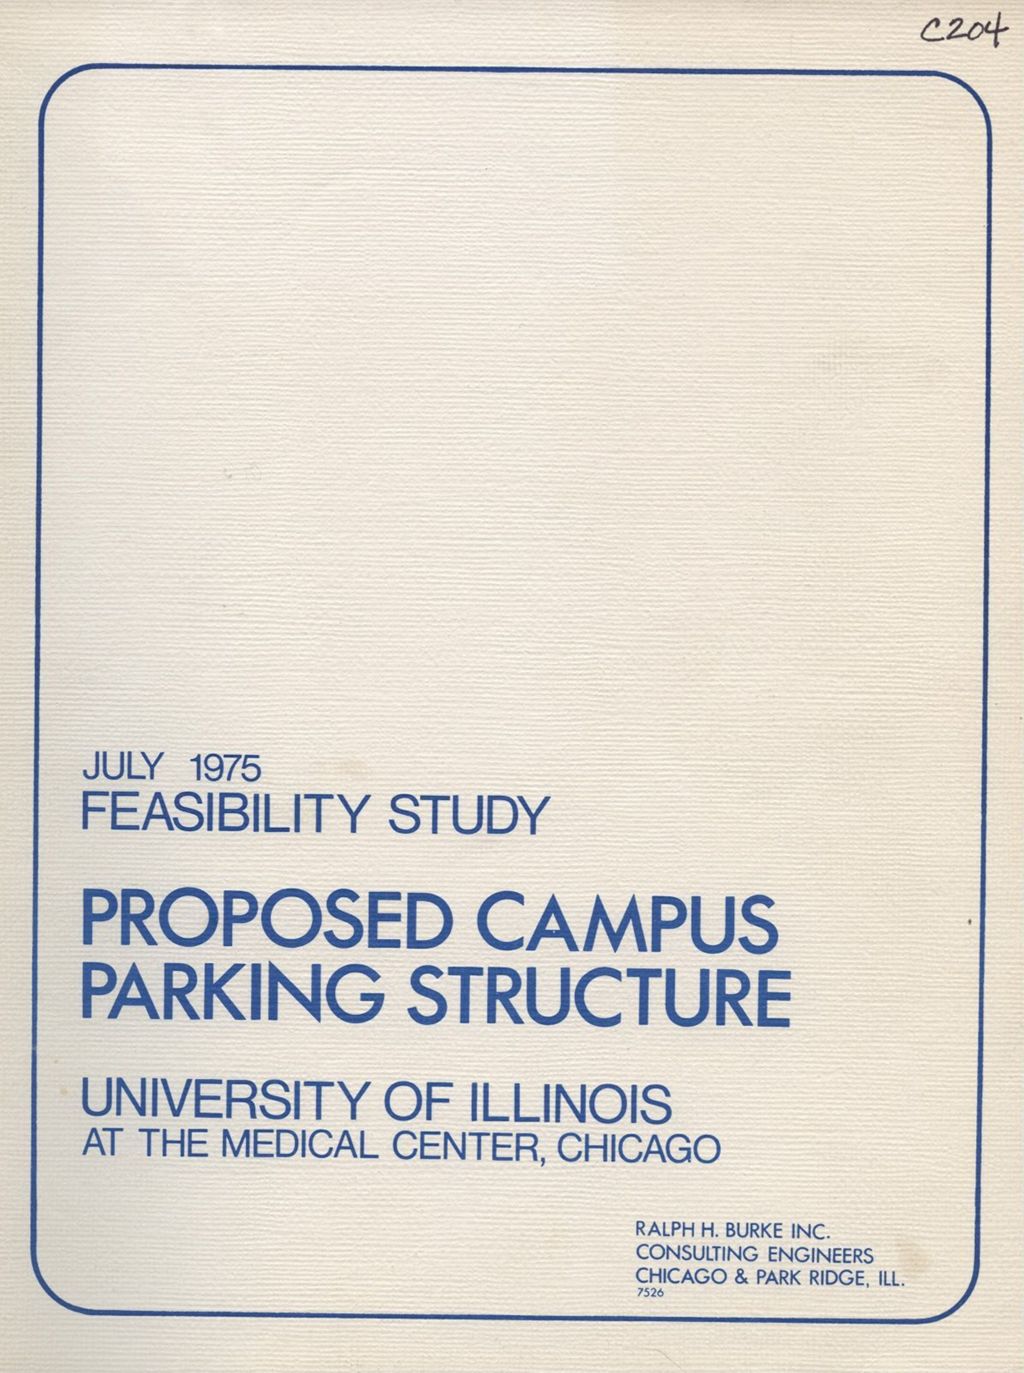 Proposed Campus Parking Structure Feasibility Study, University of Illinois at the Medical Center, Chicago